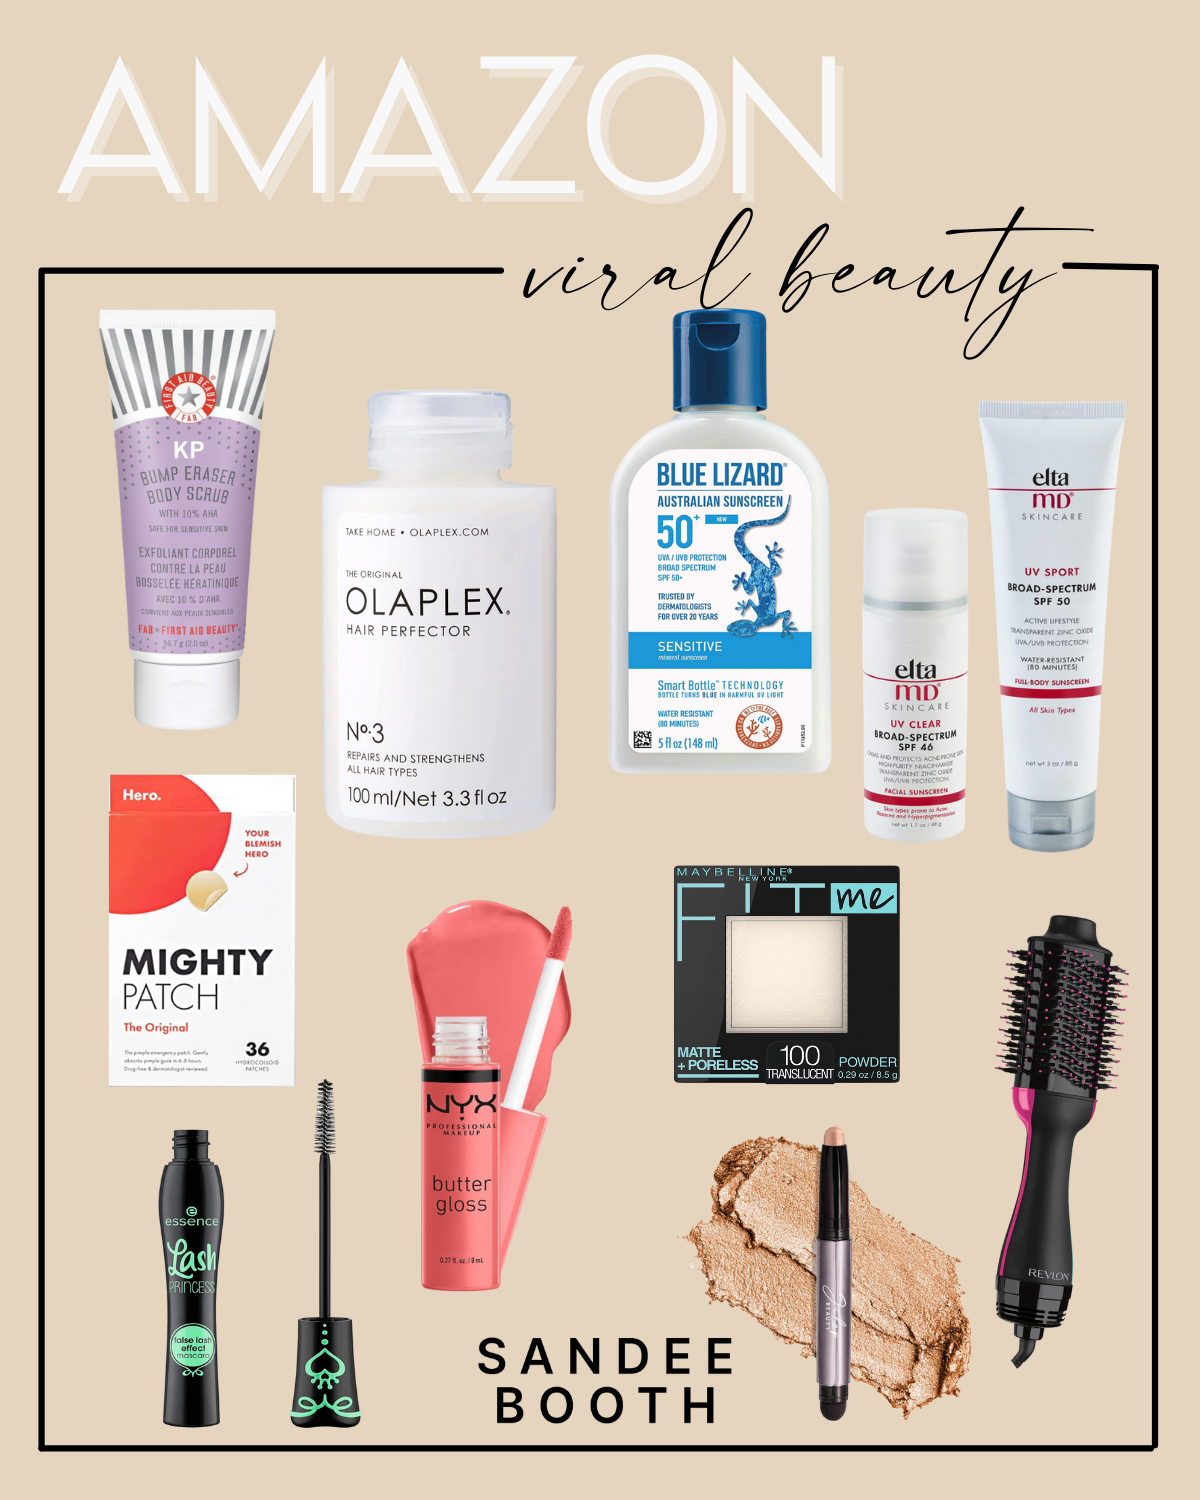 amazon viral beauty products